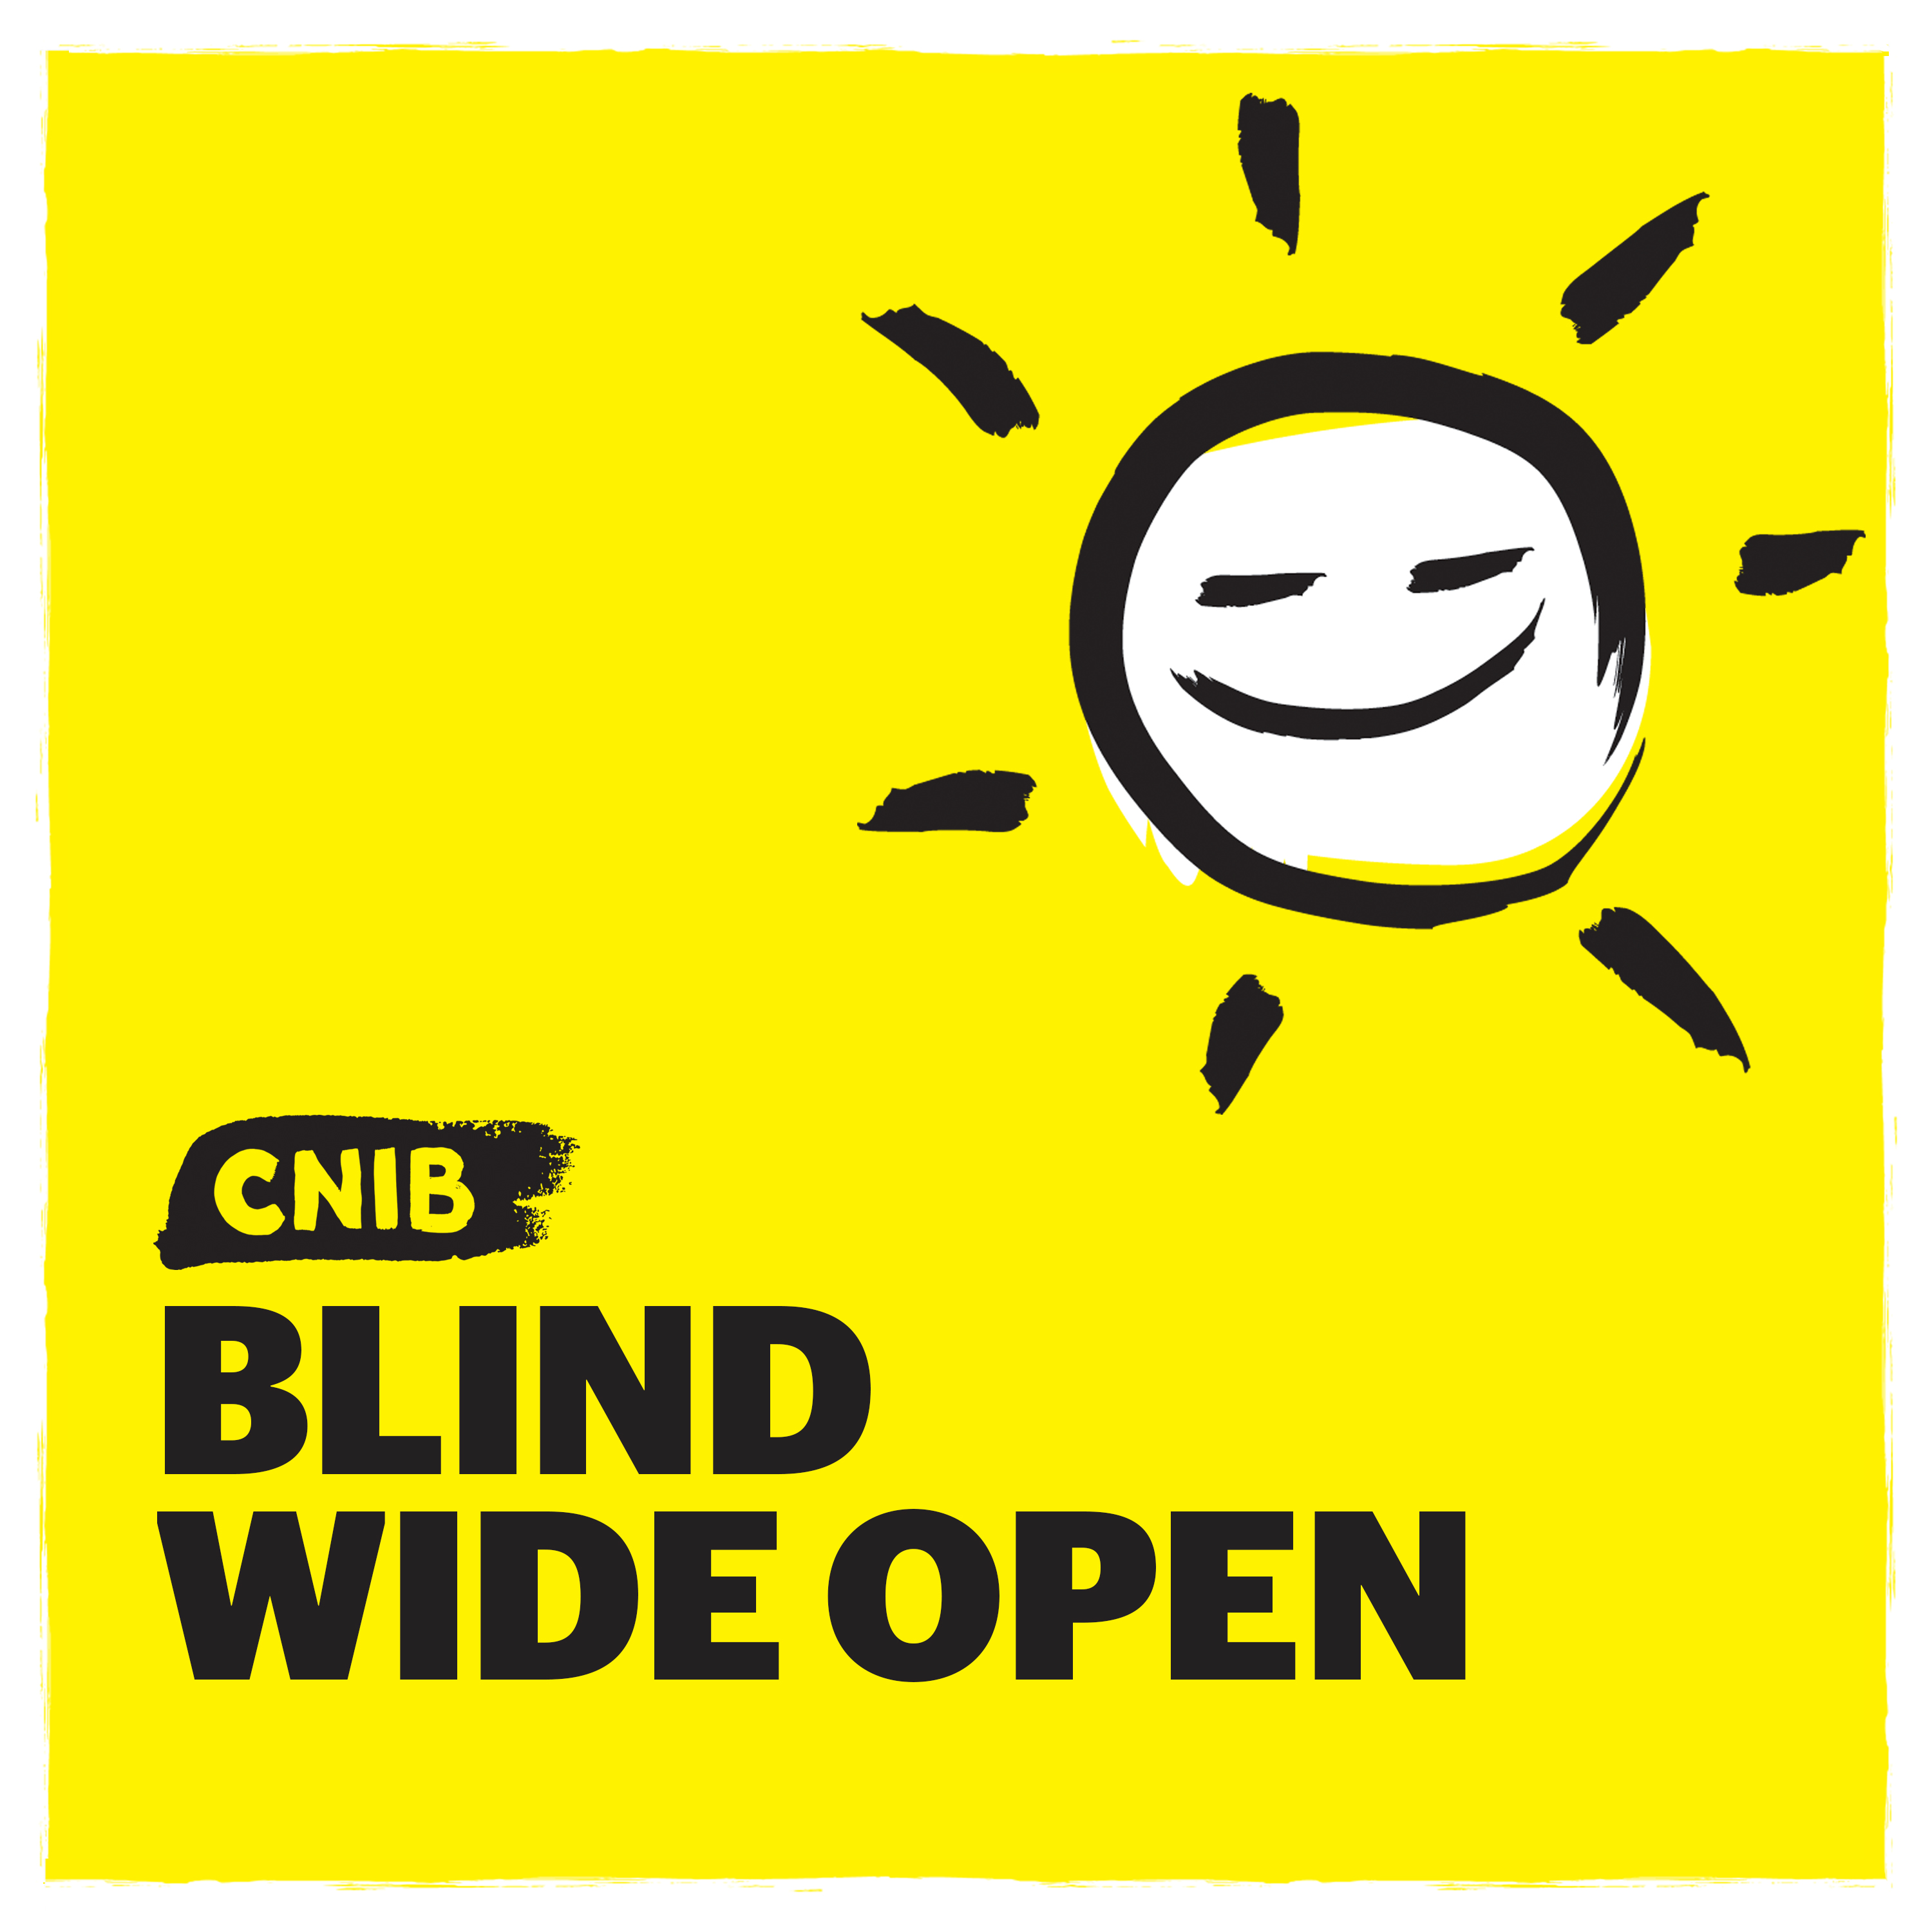 "CNIB Blind Wide Open" with sun icon on yellow.